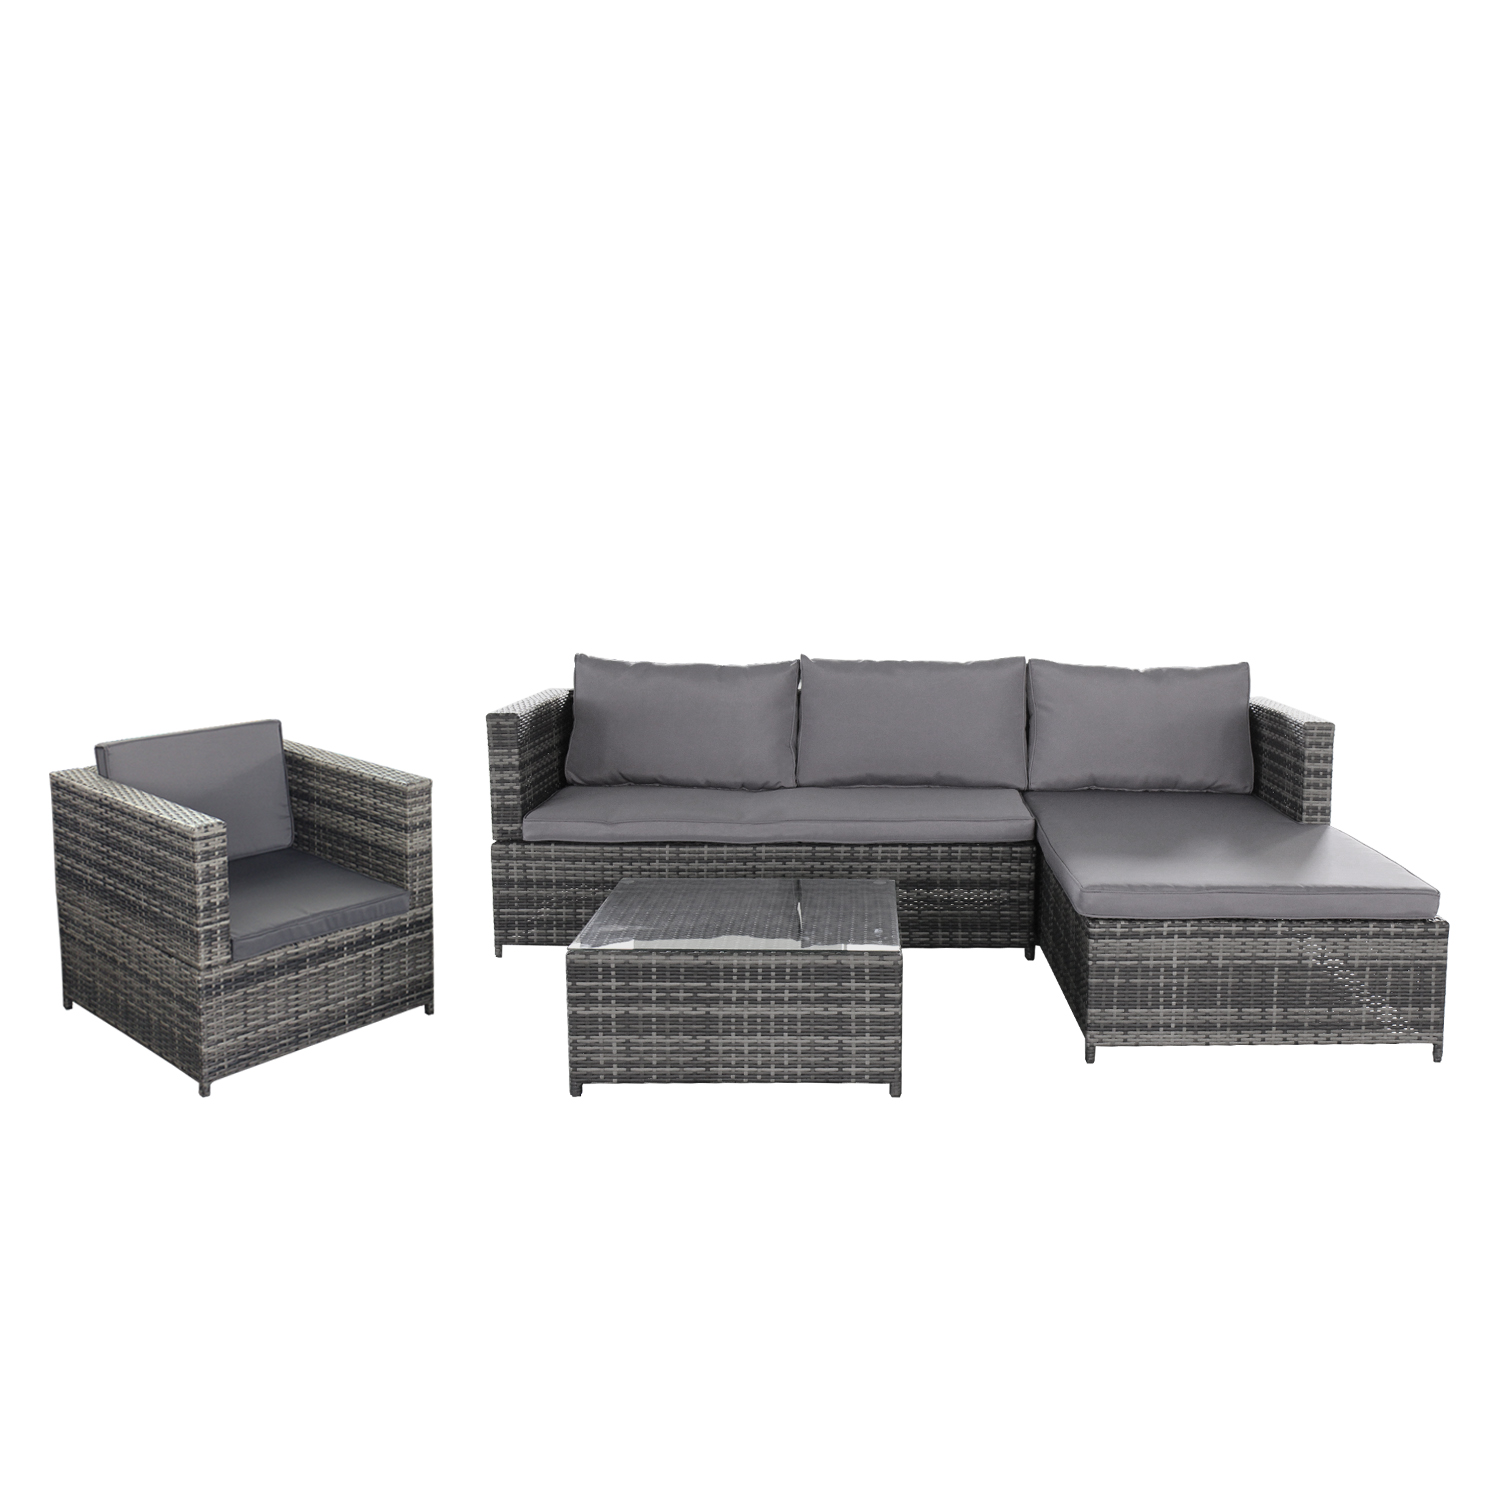 Baner Garden SJ-14067 Complete 4 Piece PE Wicker Rattan Pool Patio Garden Chaise Lounge Set with Cushions, Grey - image 2 of 7